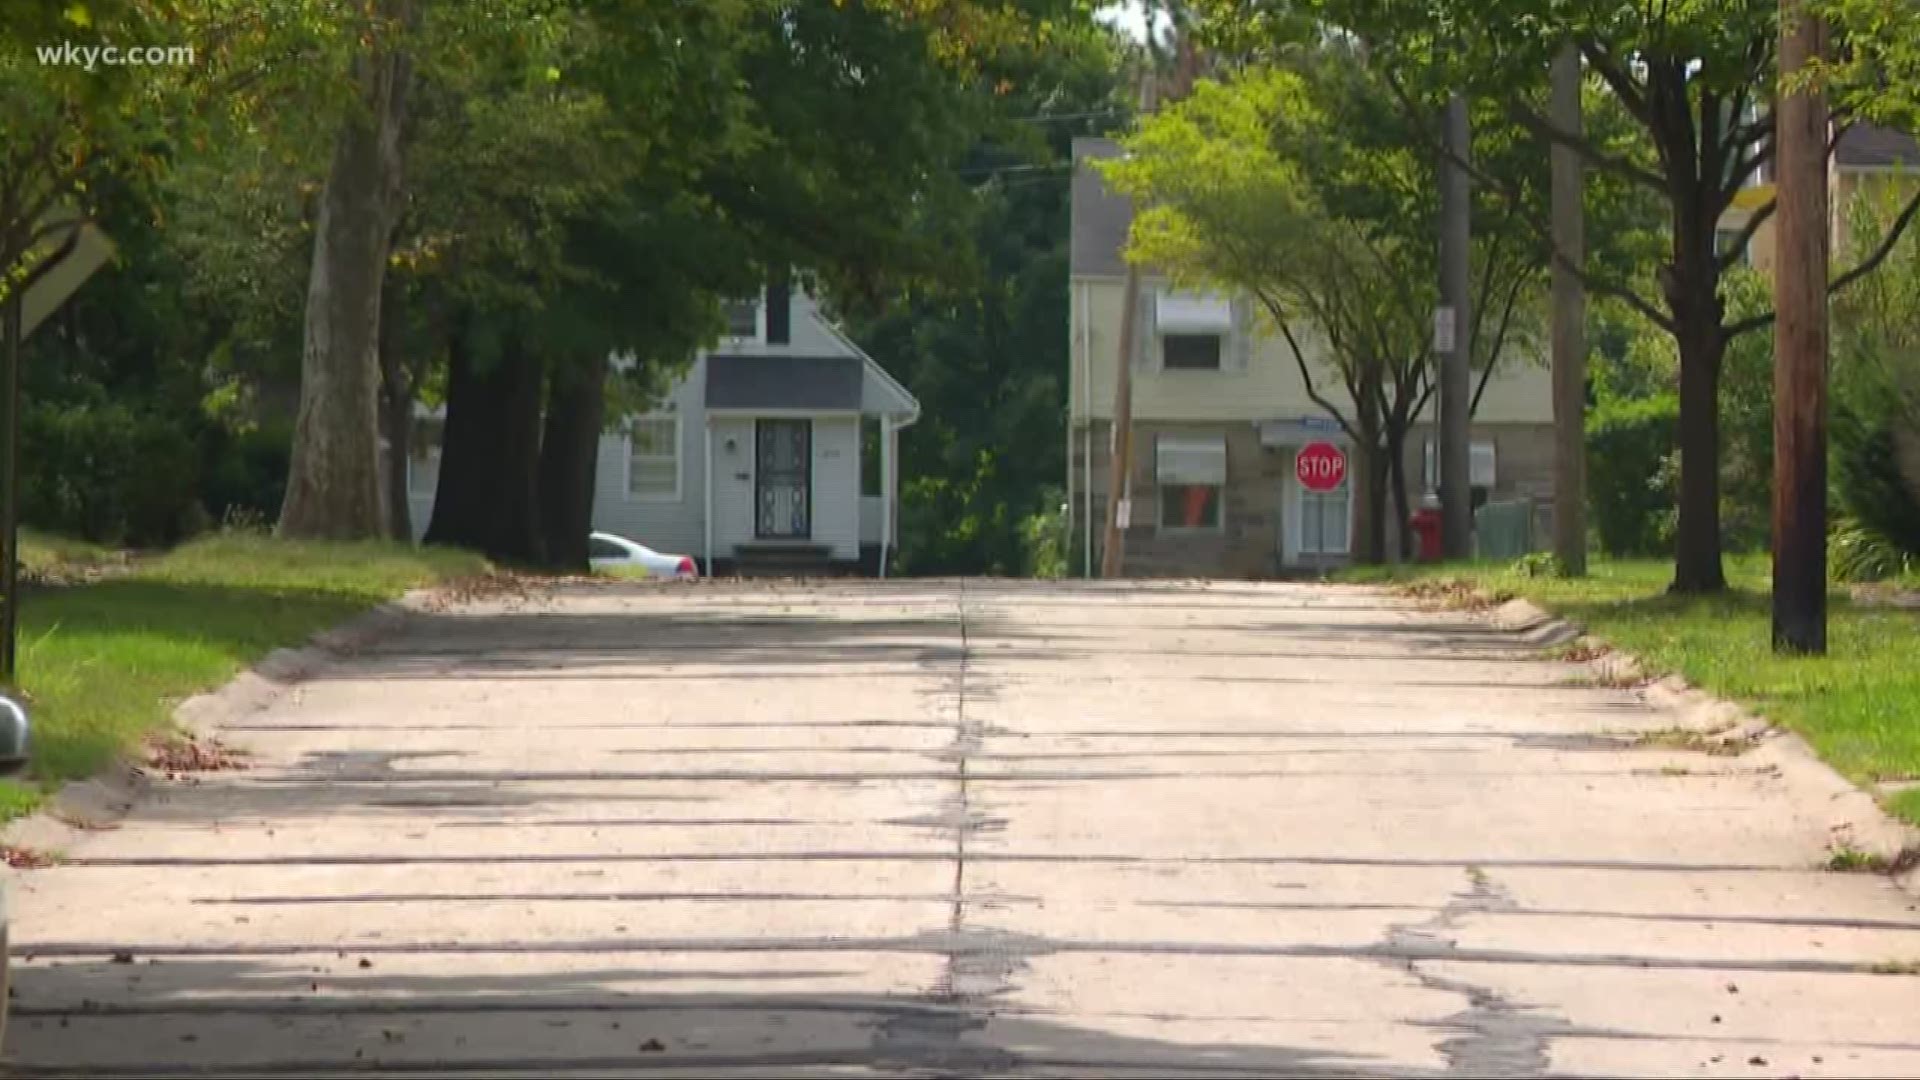 Two times in in two weeks, two females have been attacked inside their homes on the near east side of Cleveland.

The victims, ages 7 and 31, live within a block of each other. One is on Caine Avenue and the other is on East 142nd Street.